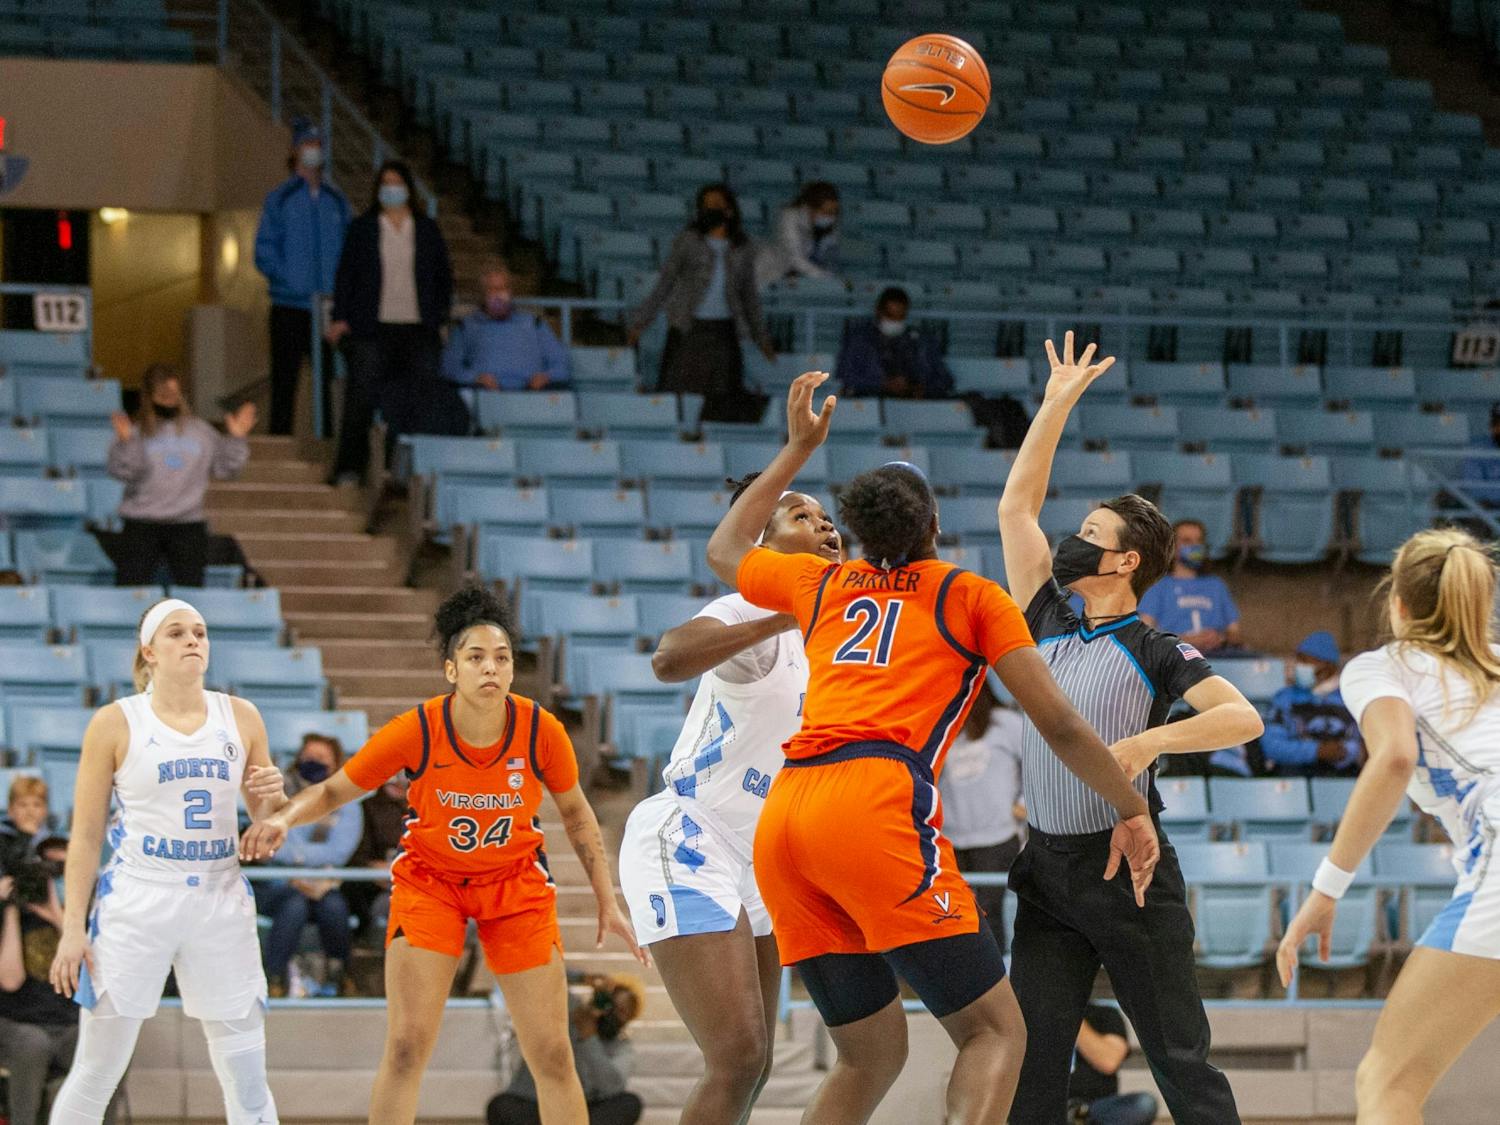 UNC and Virginia attempt to gain possession from the tip-off against UVA at Carmichael Arena on Jan. 20 2022. The Tar Heels beat the Cavaliers 61-52.